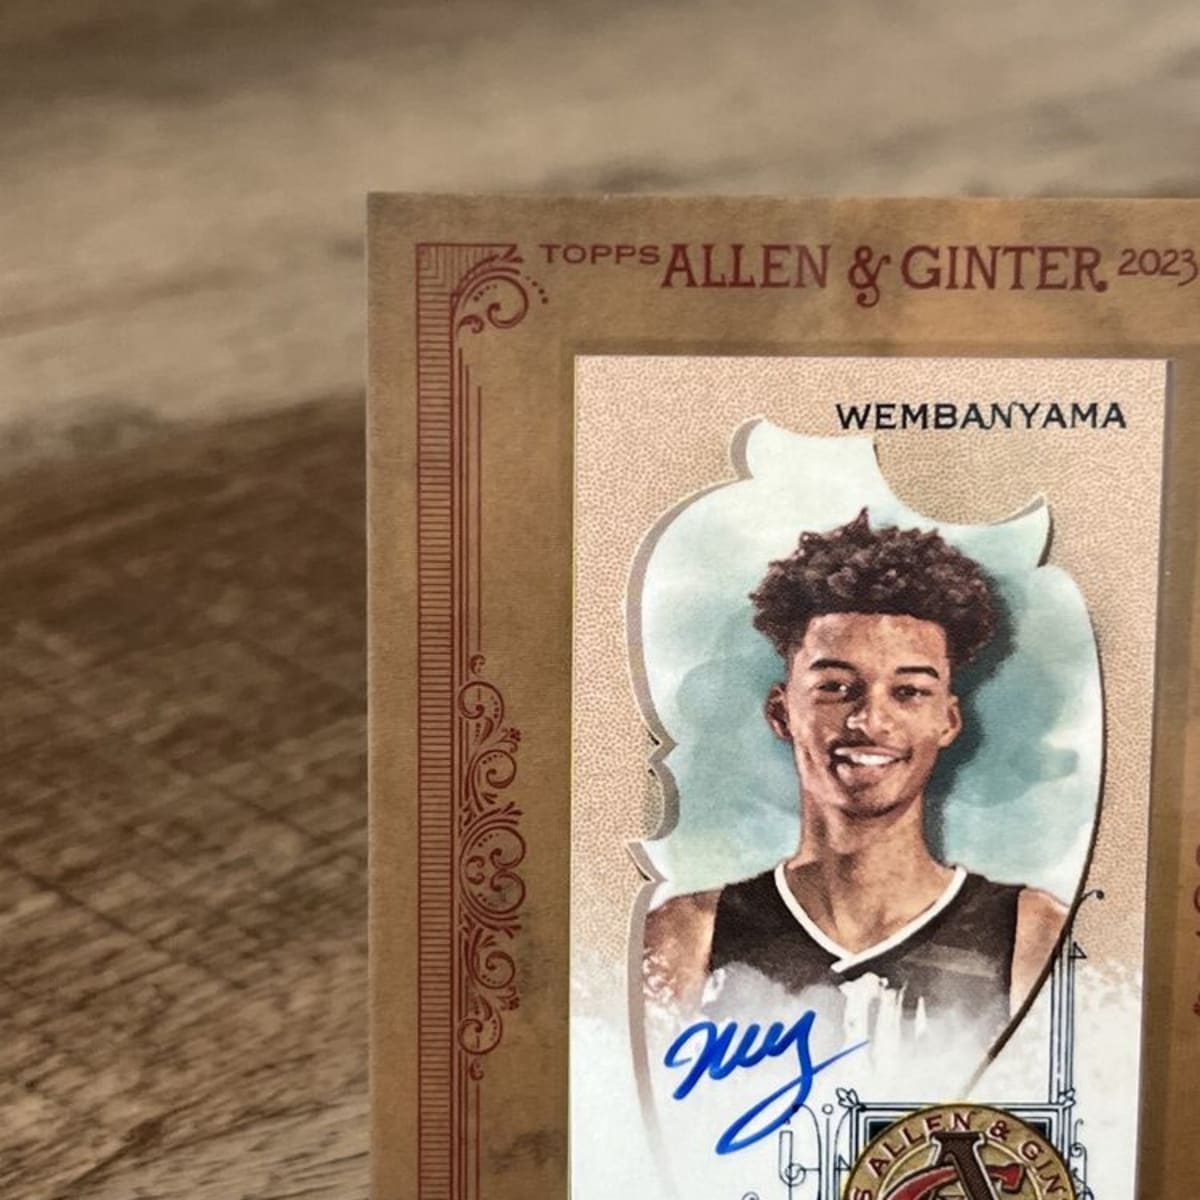 Victor Wembanyama card sells for bonkers price at Goldin